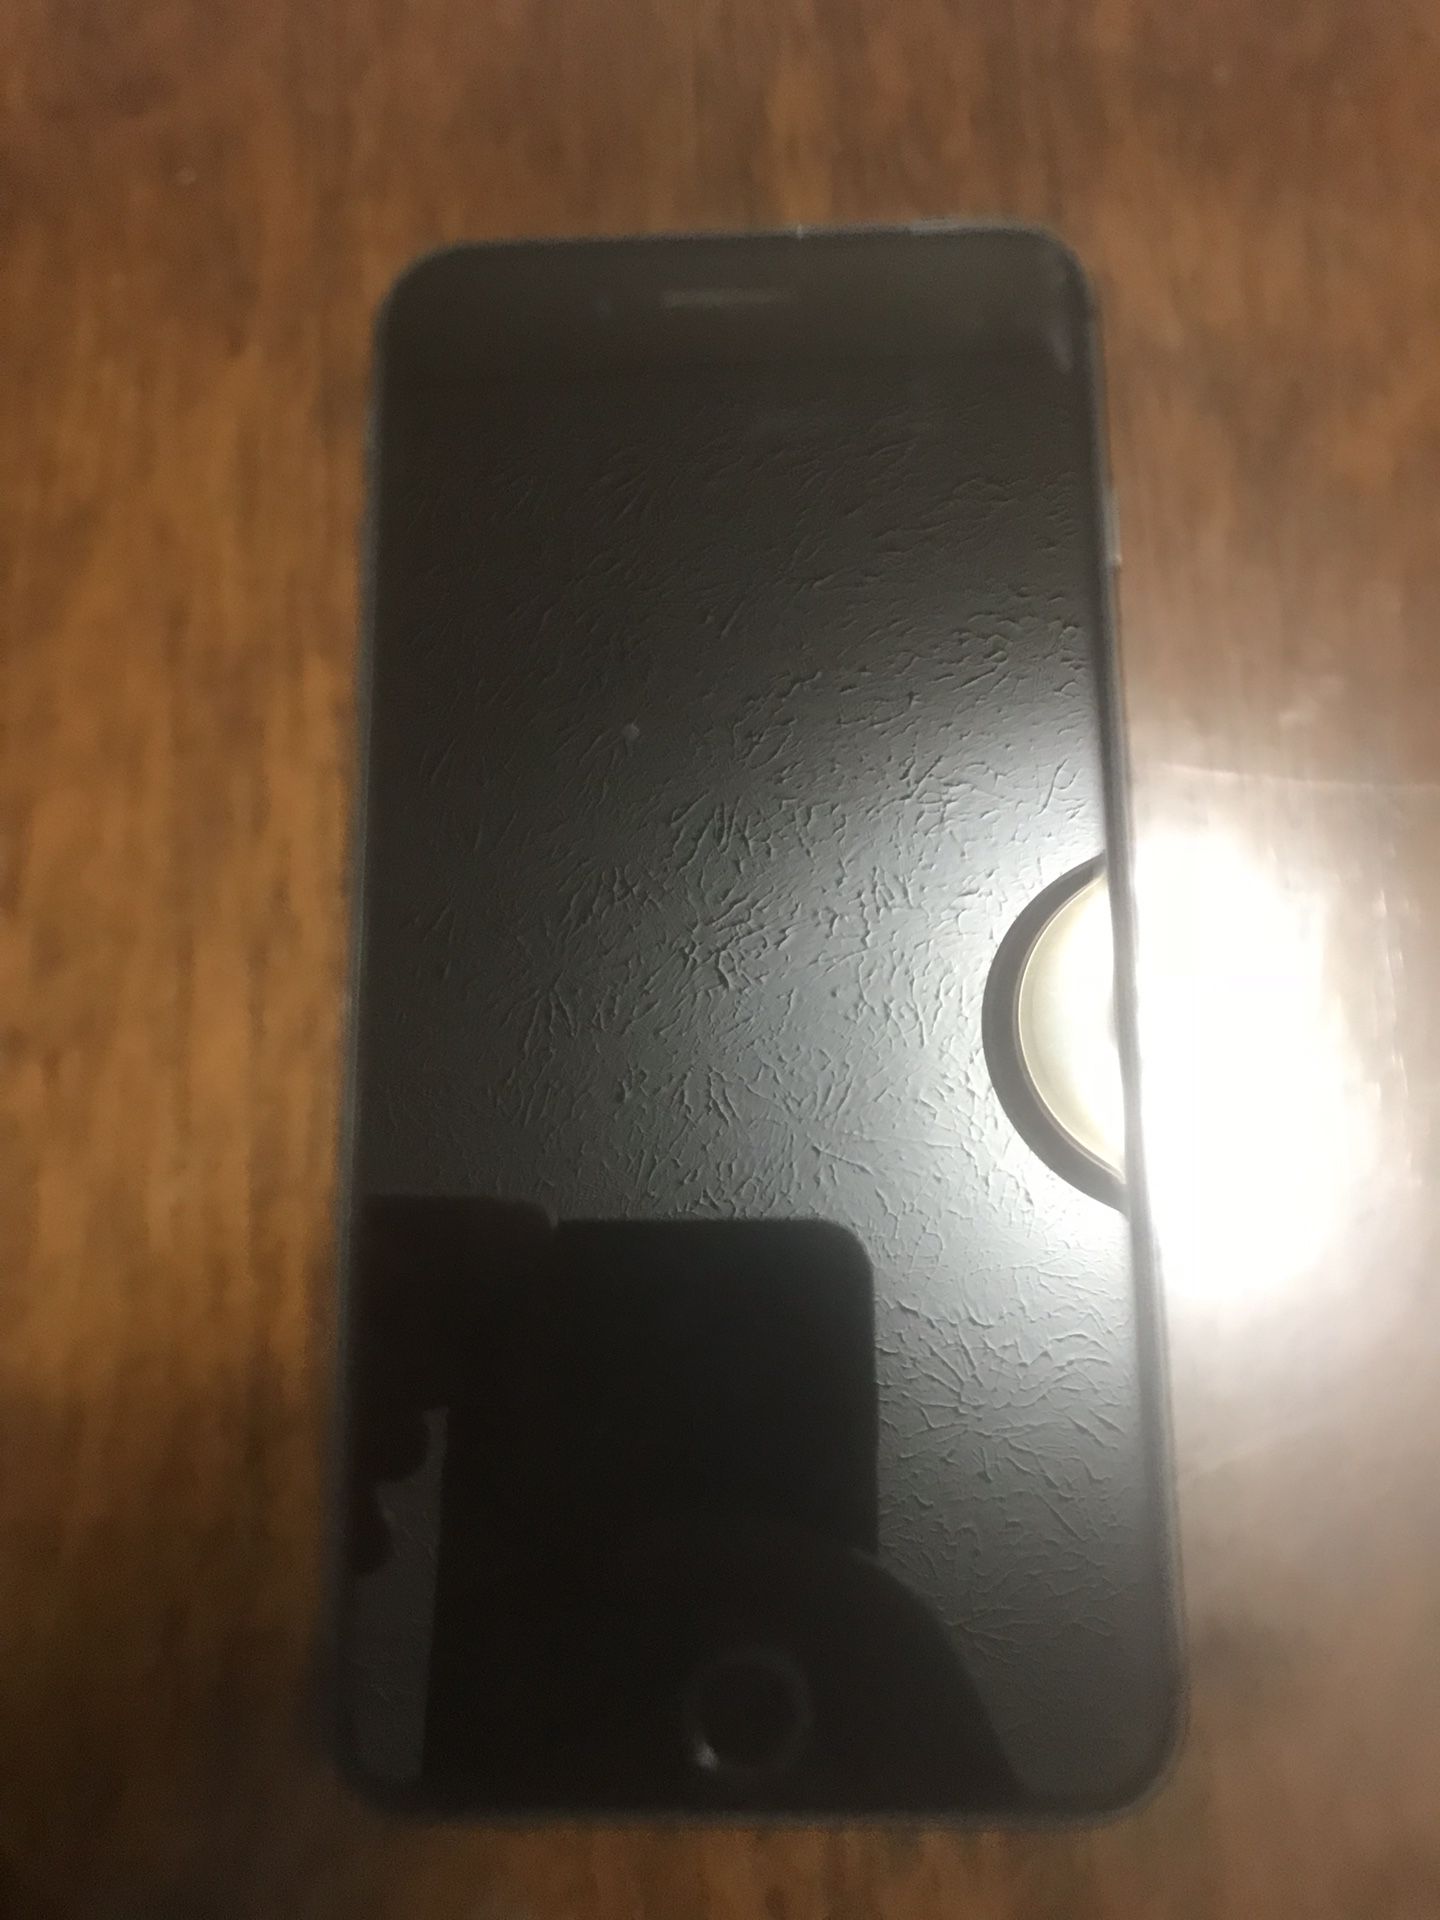 iPhone 8 Plus Excellent Condition ICloud Locked